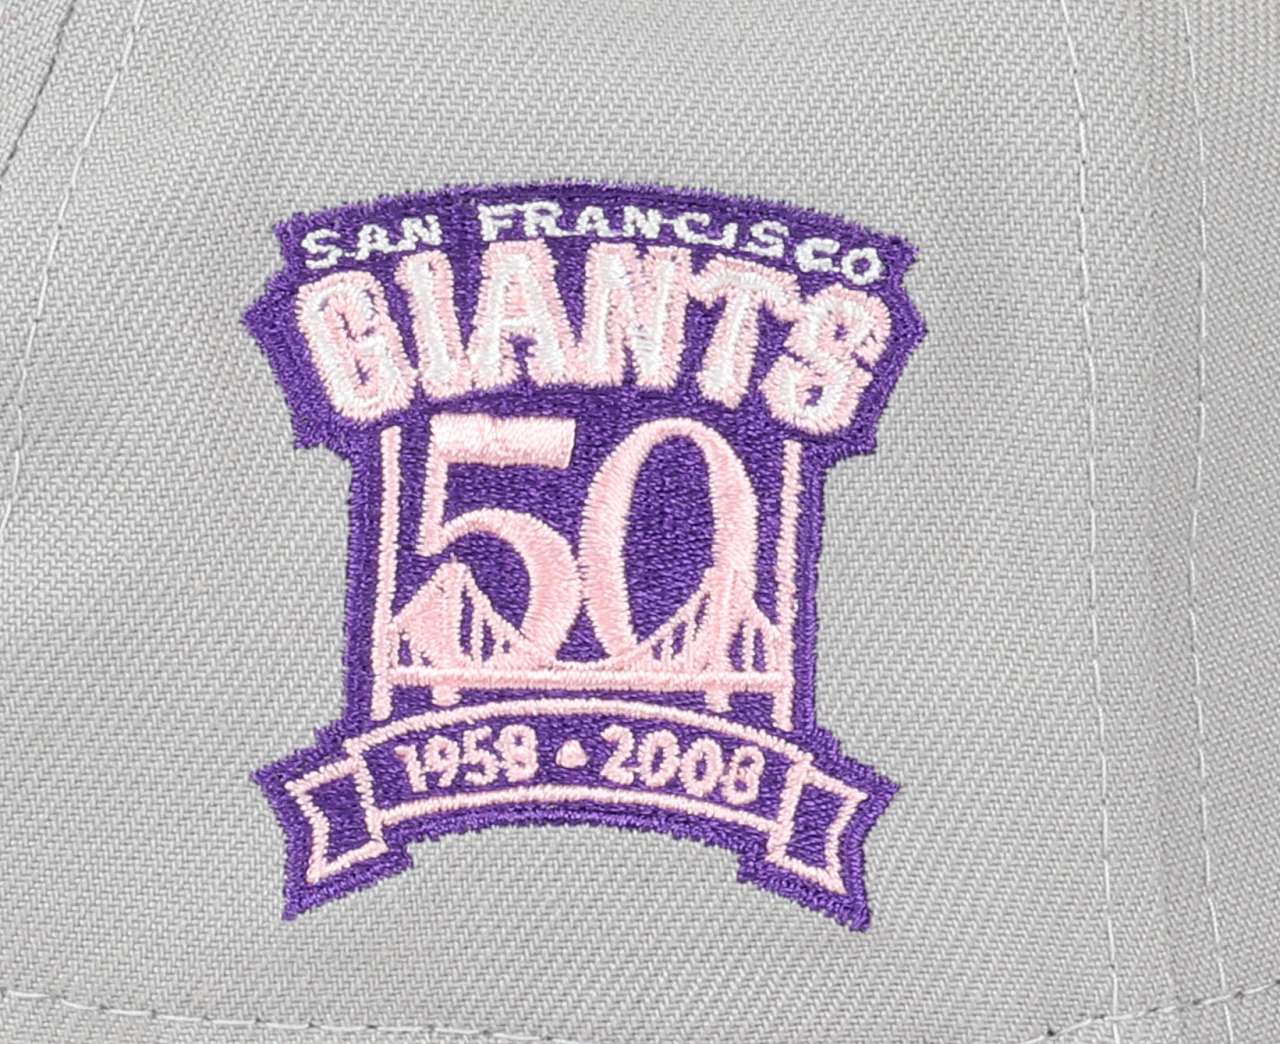 San Francisco Giants MLB Cooperstown 50th Anniversary Sidepatch Gray Black 9Forty A-Frame Adjustable Cap New Era